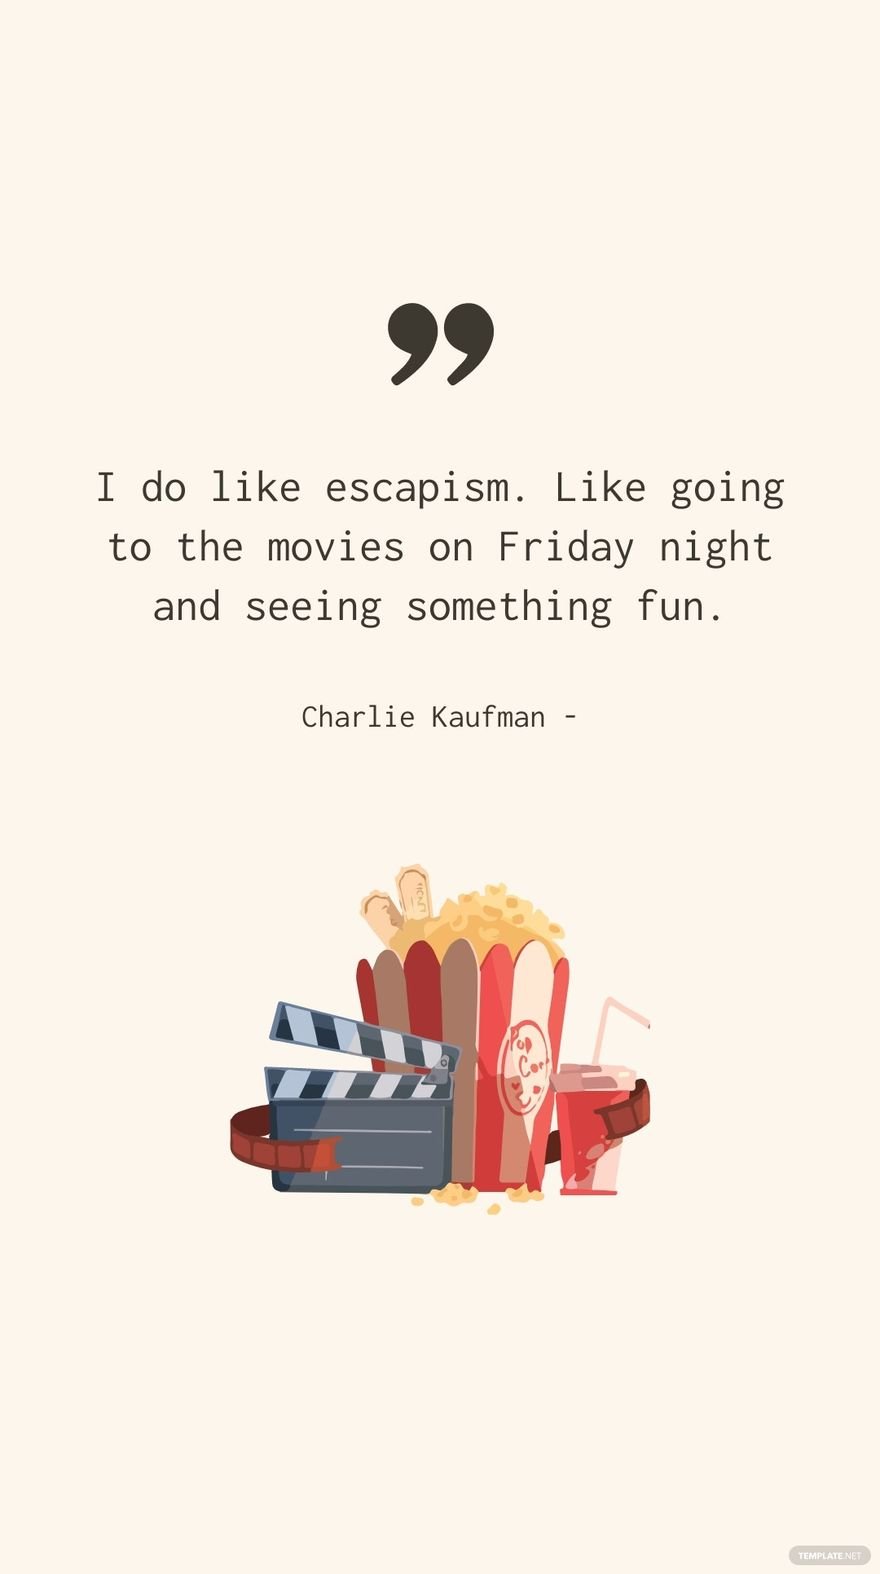 Charlie Kaufman - I do like escapism. Like going to the movies on Friday night and seeing something fun. in JPG